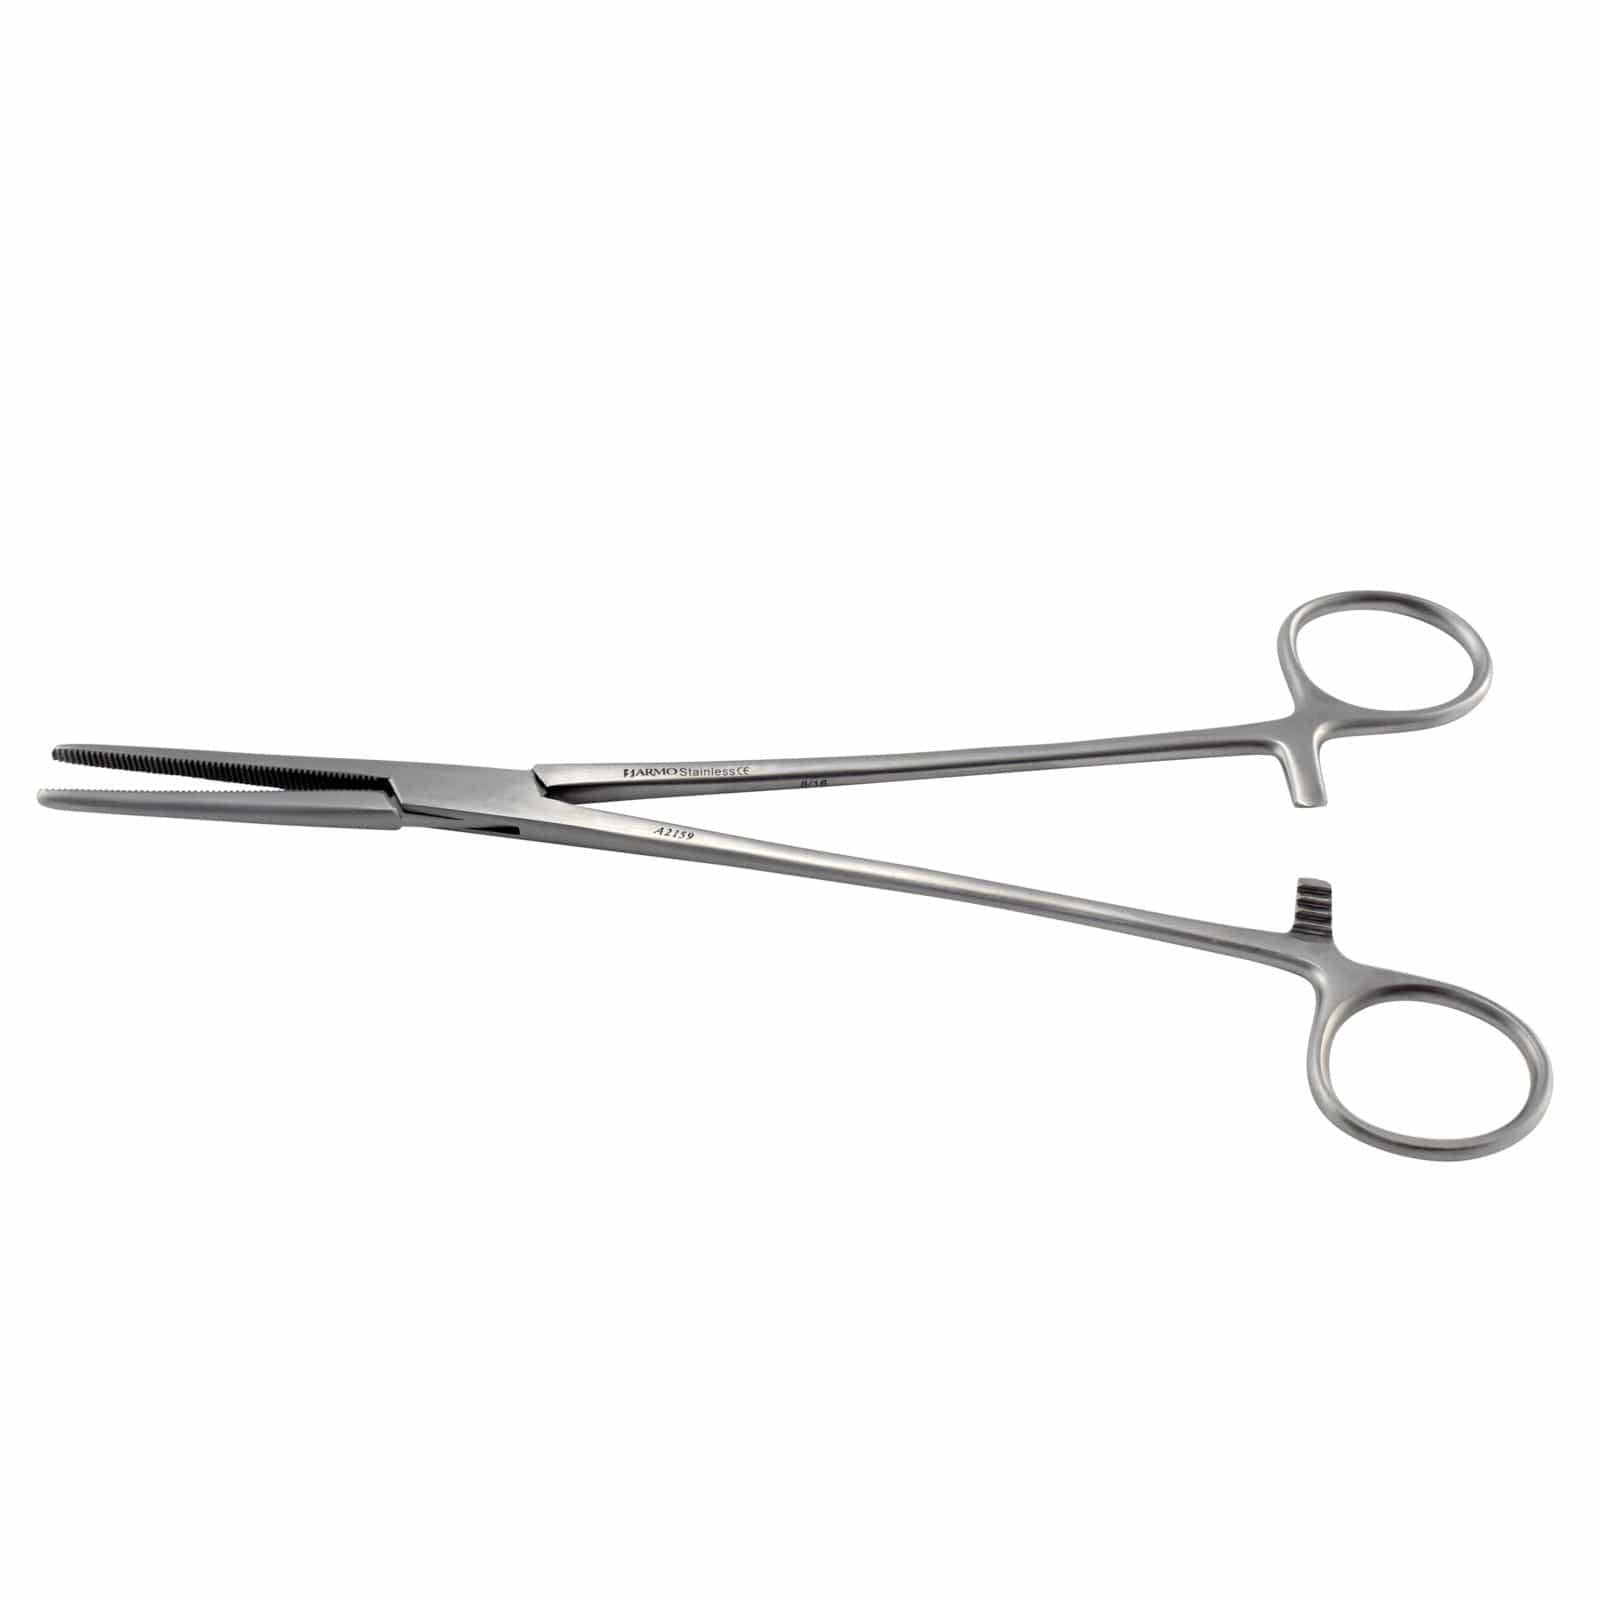 Armo Surgical Instruments 20cm / Straight Armo Roberts Artery Forceps